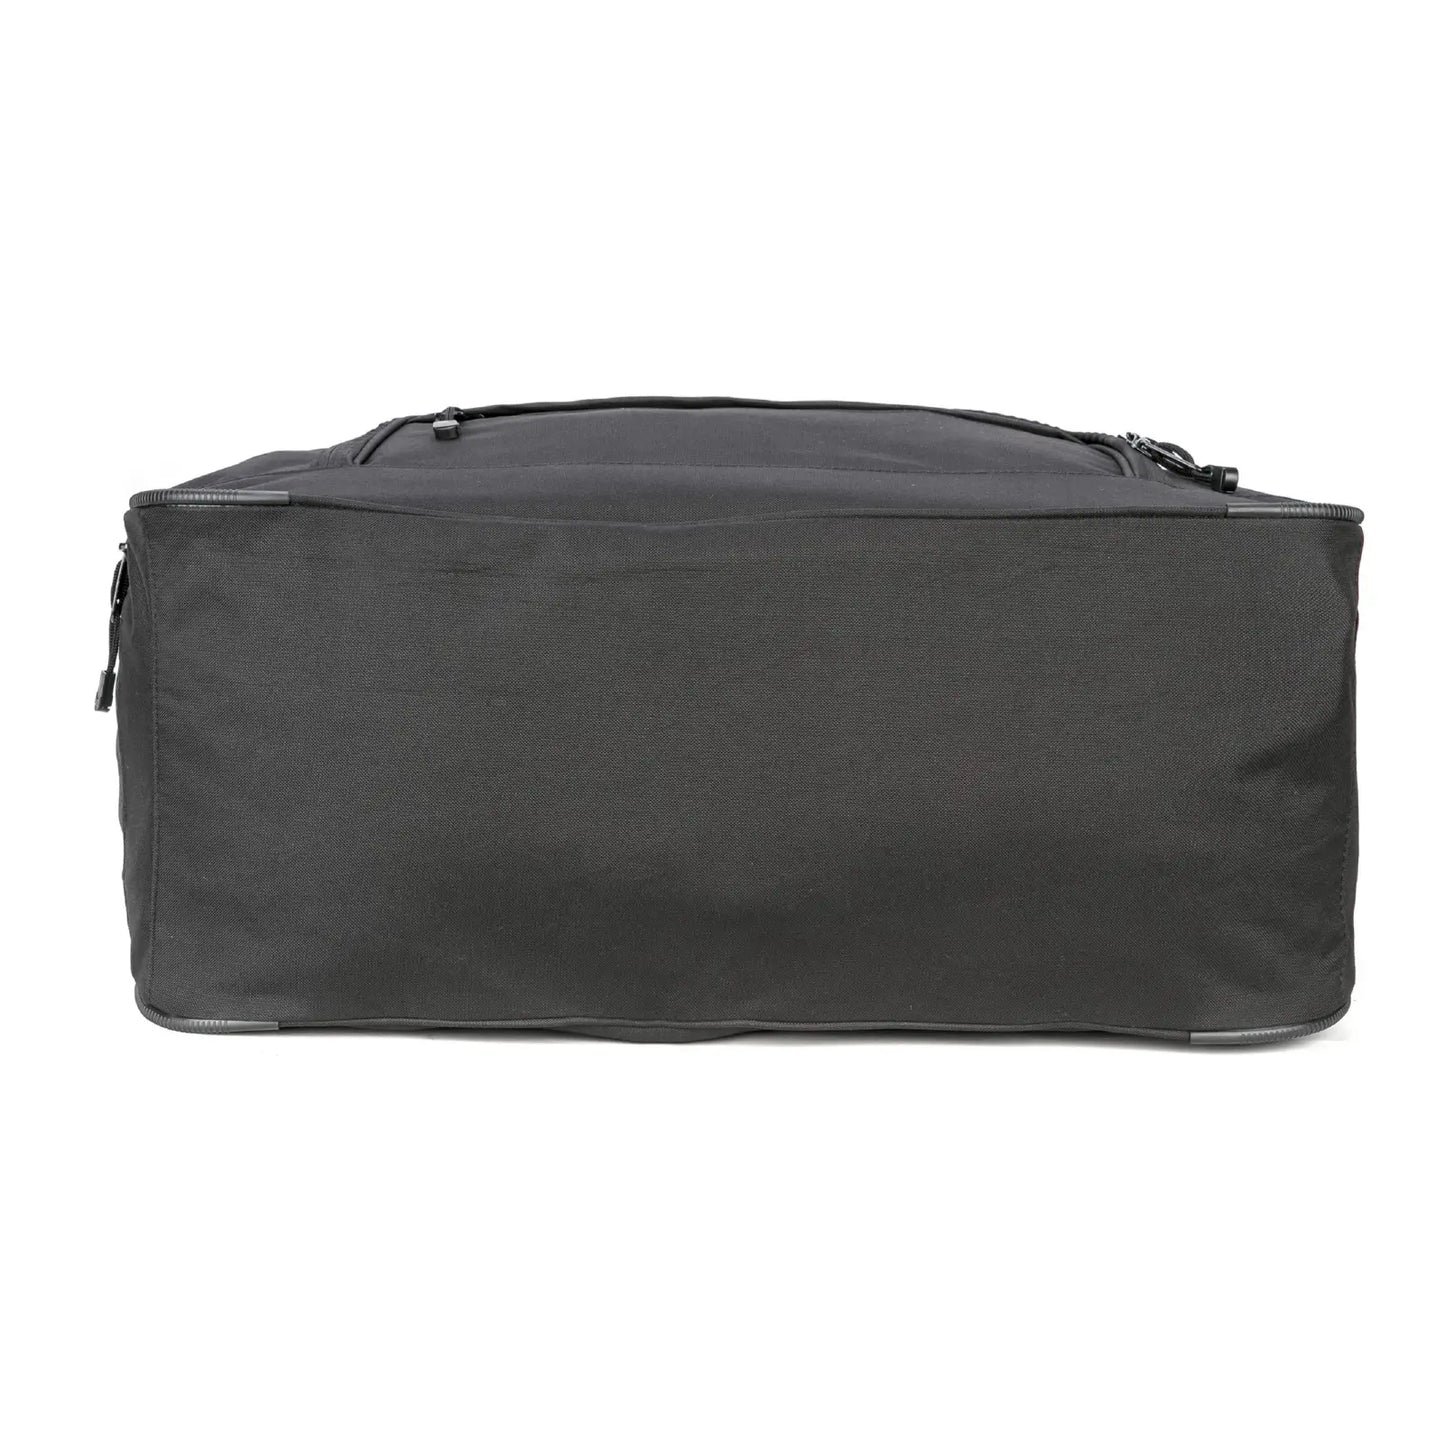 Police Duffel Gear Bag with MOLLE Side Compartment 24"x12"